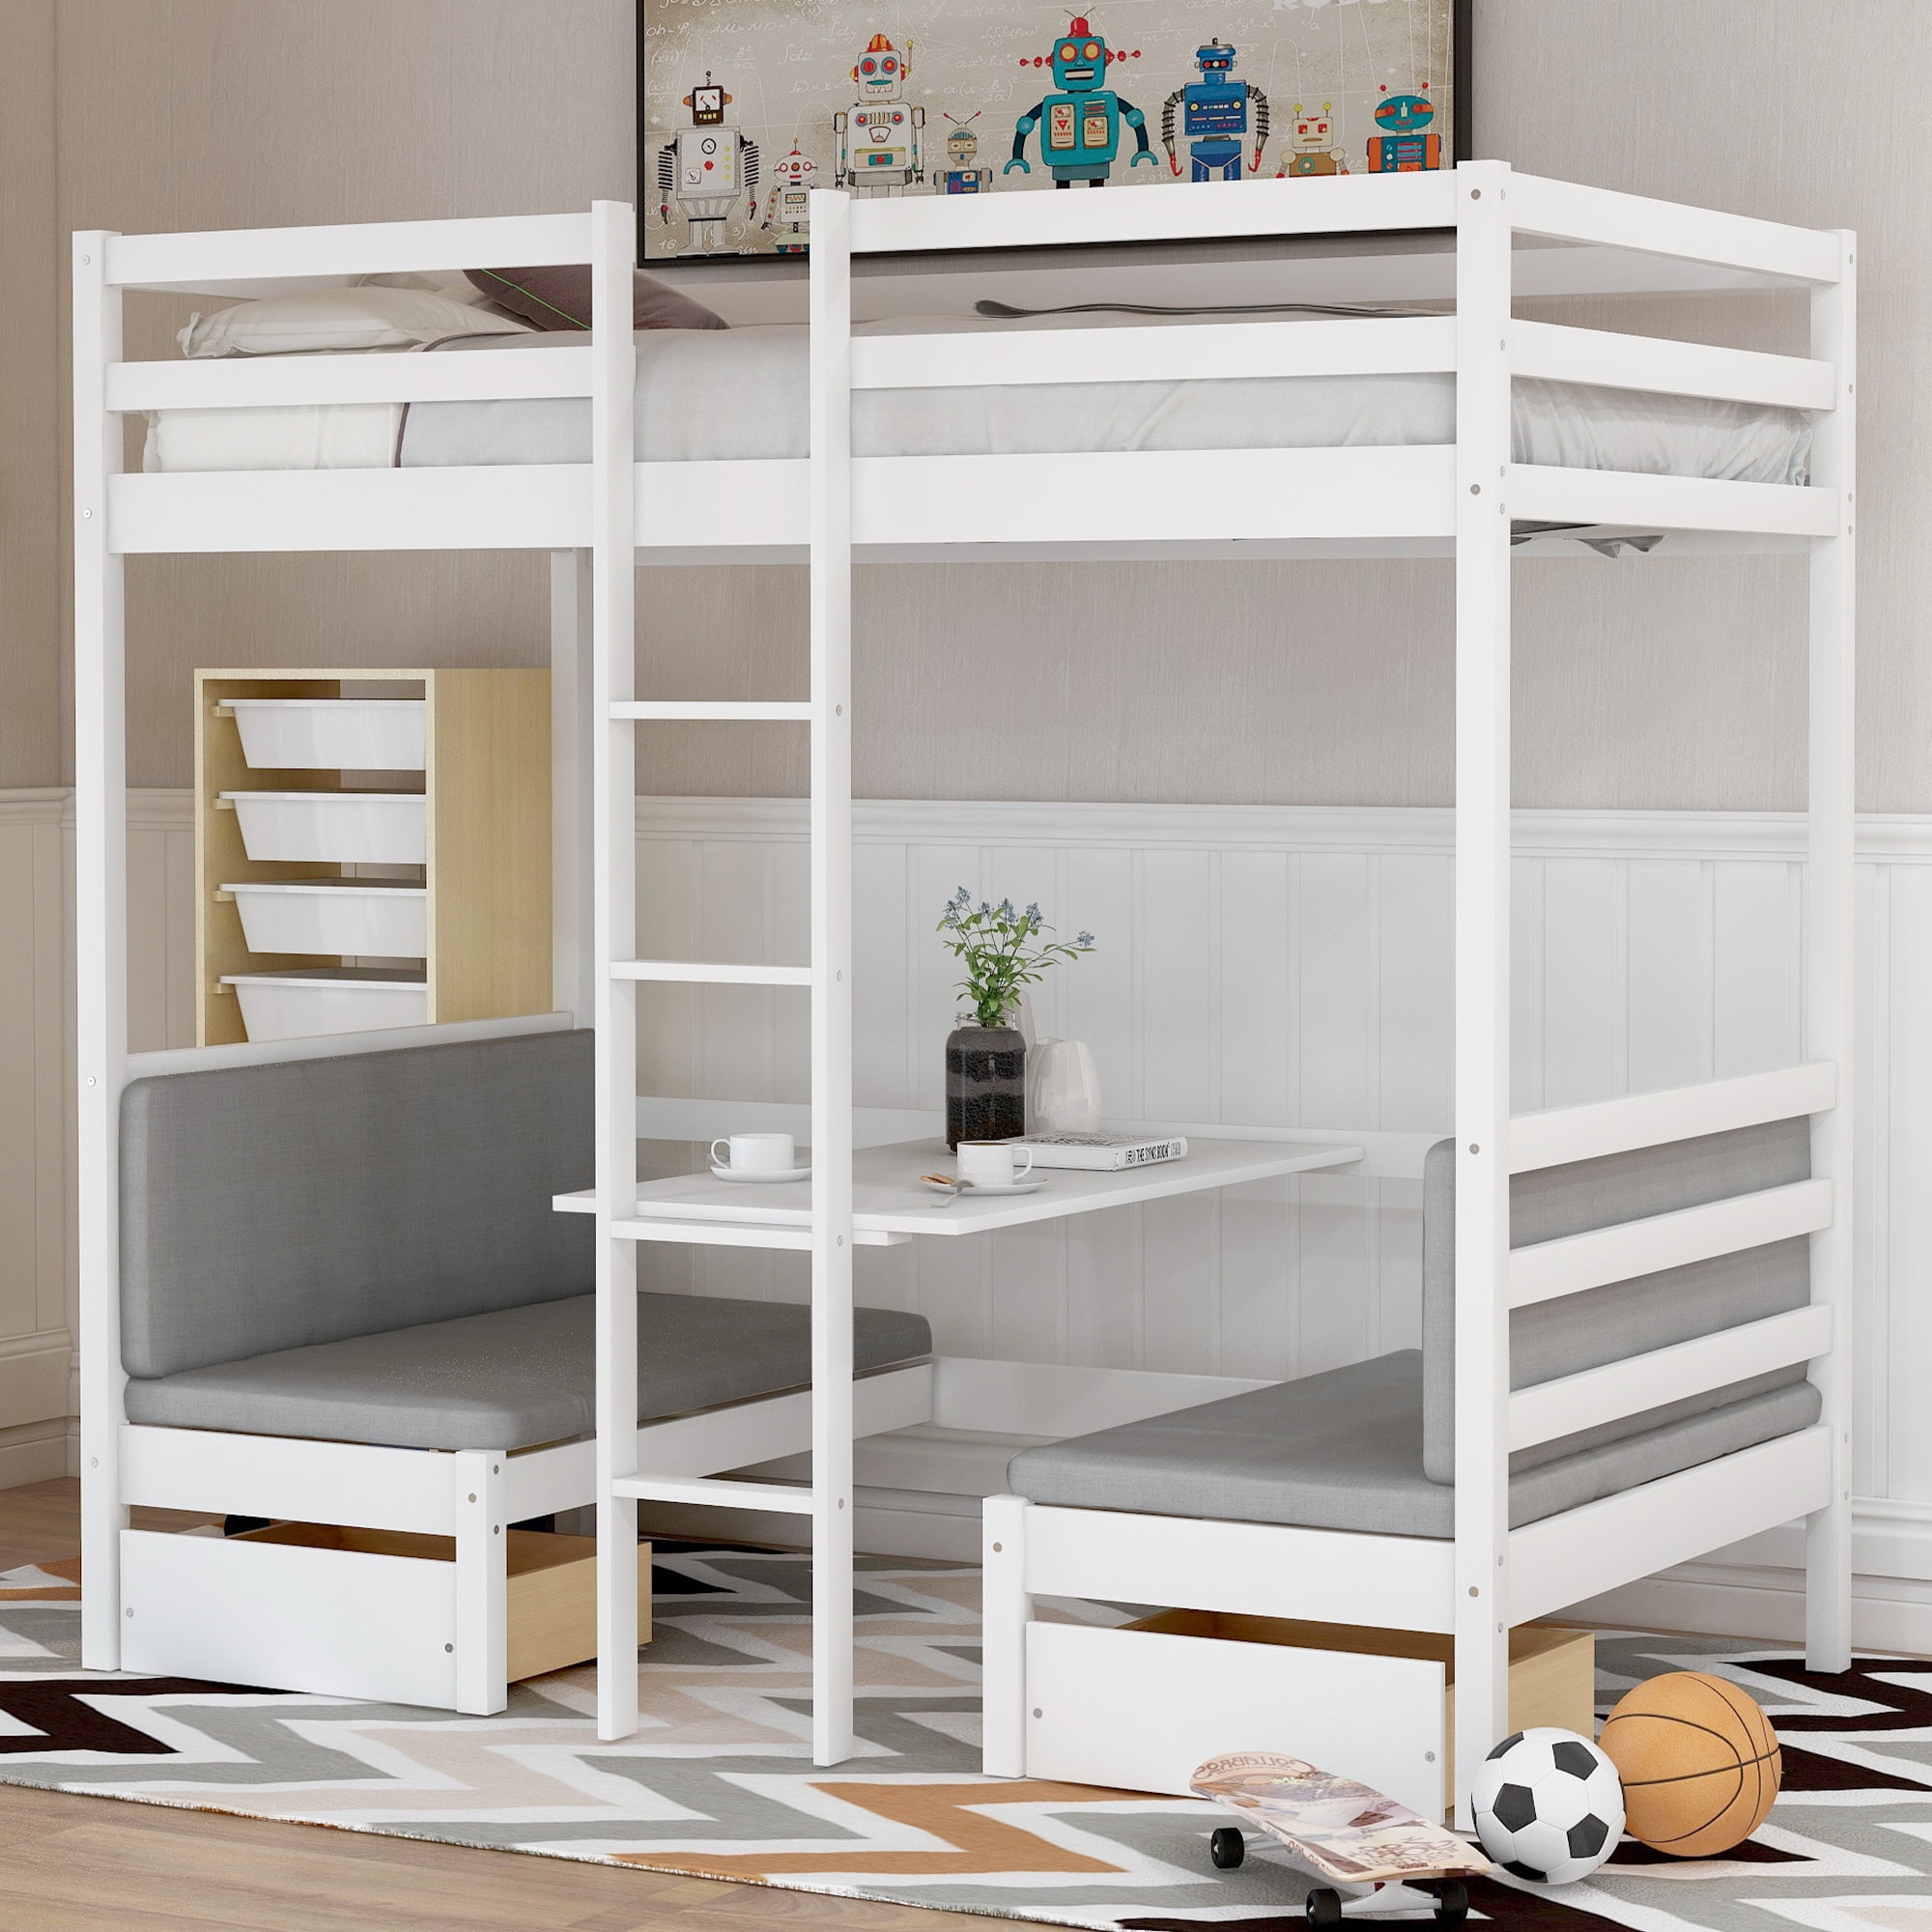 Euroco Solid Wood Convertible Twin Bunk, Can You Paint Over A Bunk Bedside Table